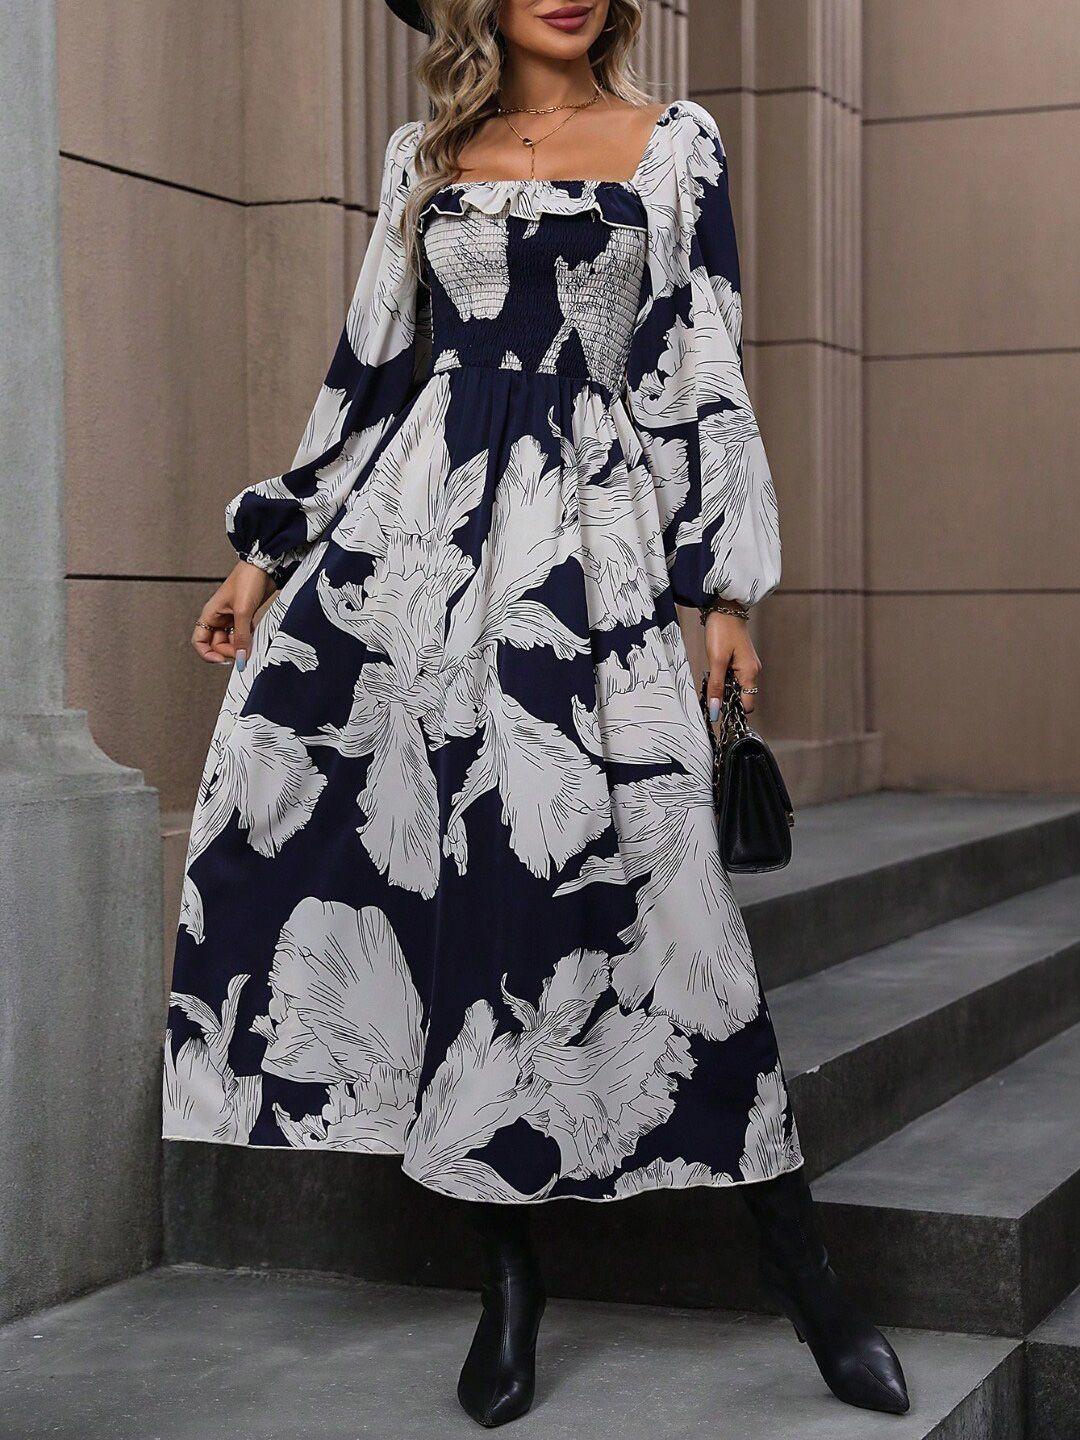 stylecast x kpop black floral printed square neck puff sleeve smocked fit & flare dress